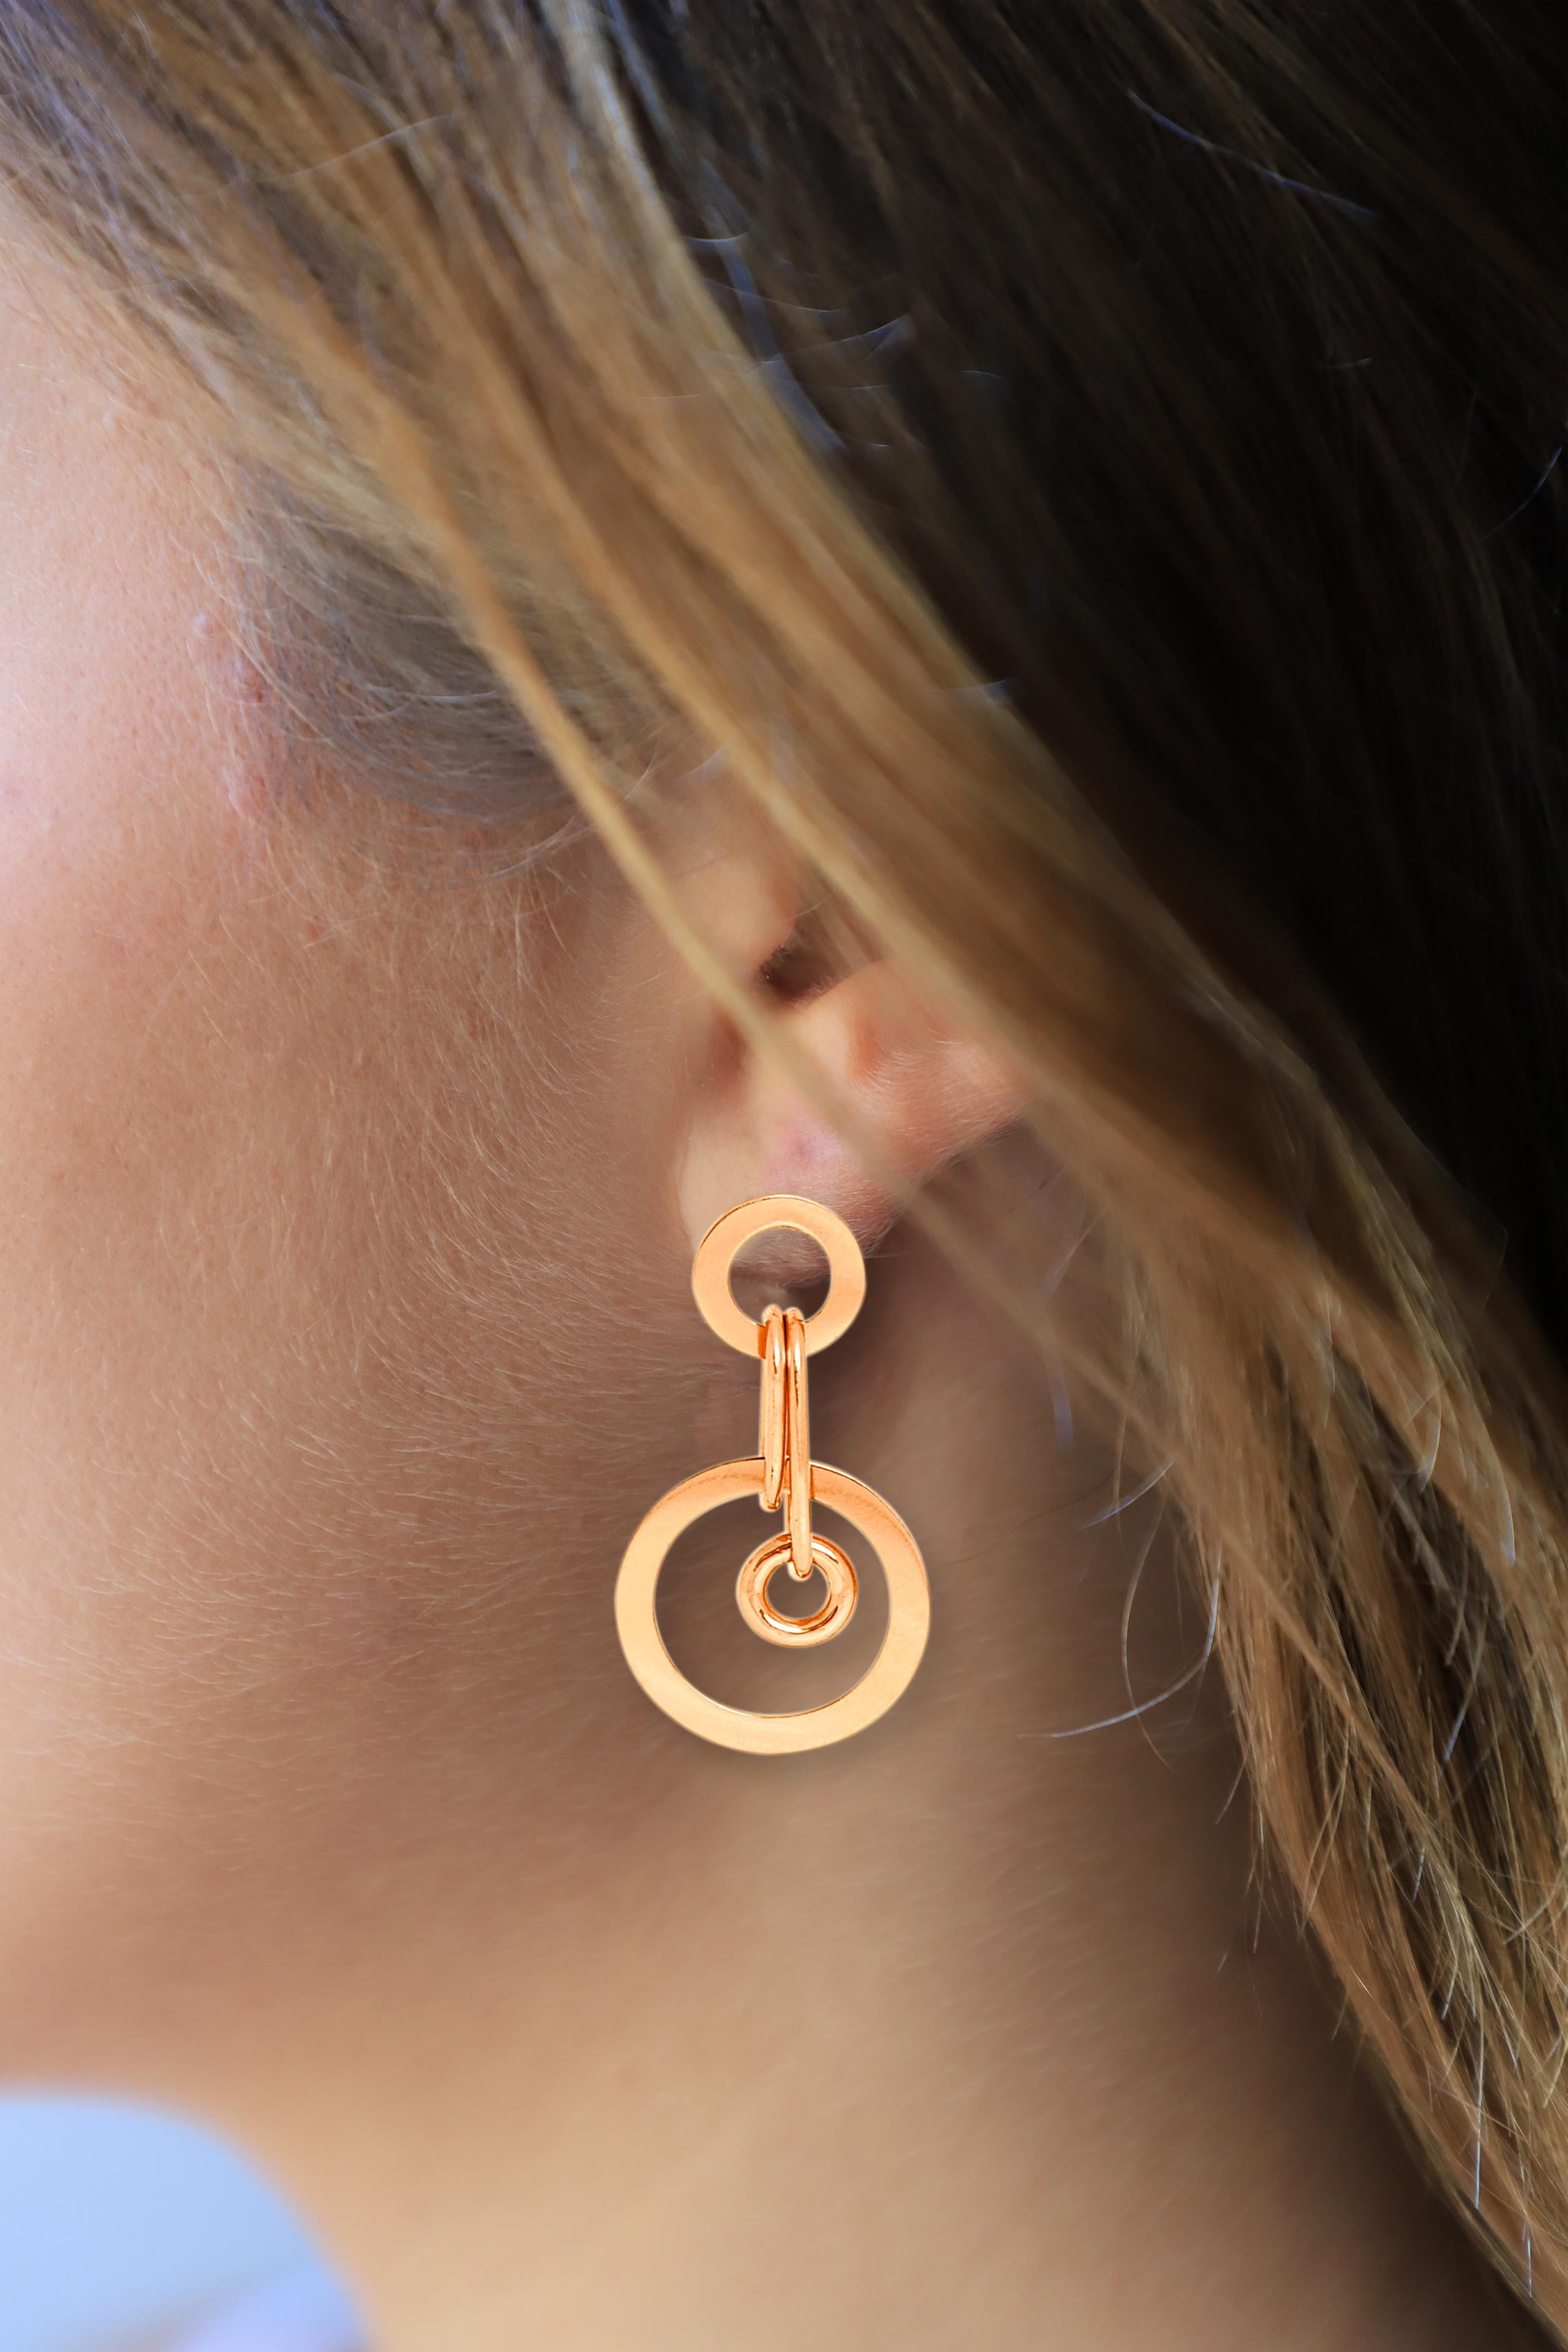 18 Karats Yellow Gold Hoops Dangle Modernist Design Round Dance Earrings In New Condition For Sale In Rome, IT